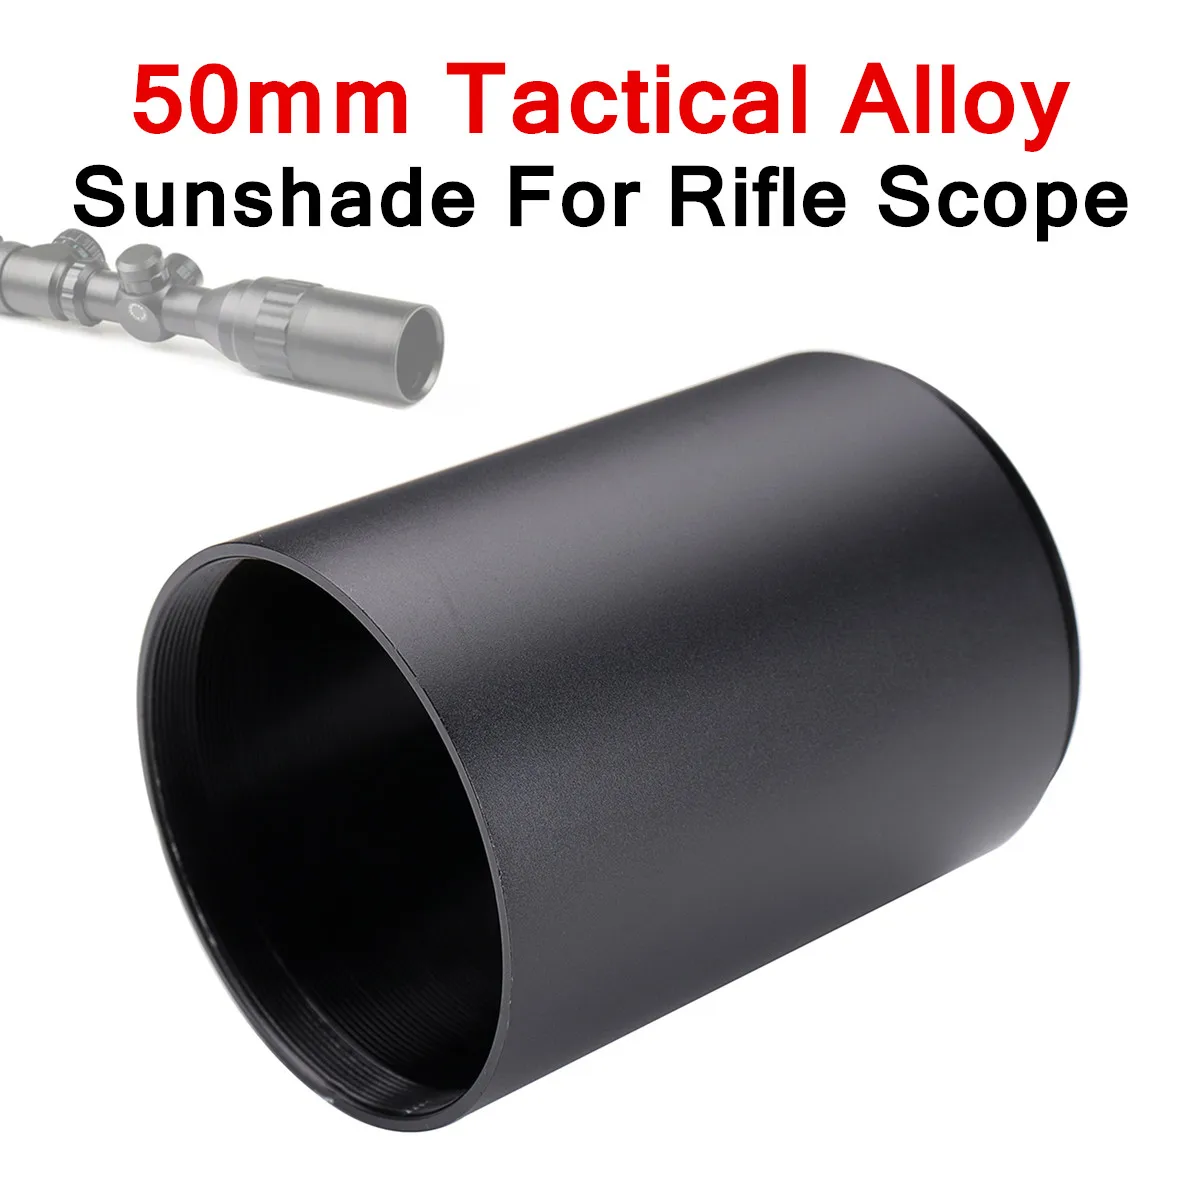 50mmTactics Alloy Advanced Optic Sunshade Shade for Standard Rifle Scope Durable 